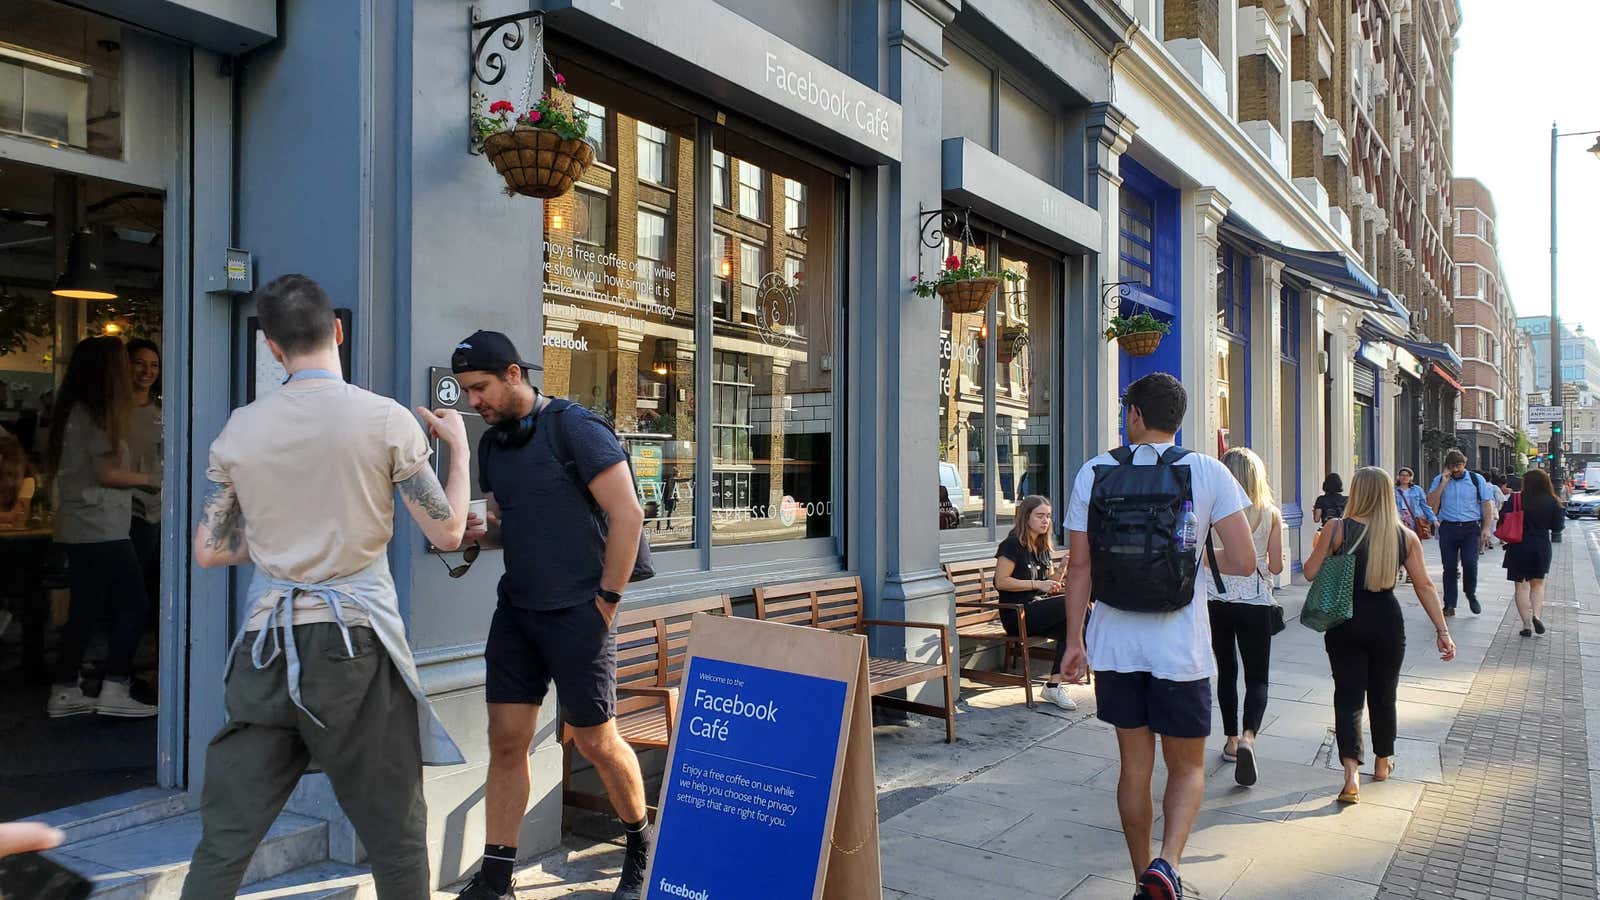 Facebook’s pop-up at the Attendant coffee shop in Shoreditch, London.